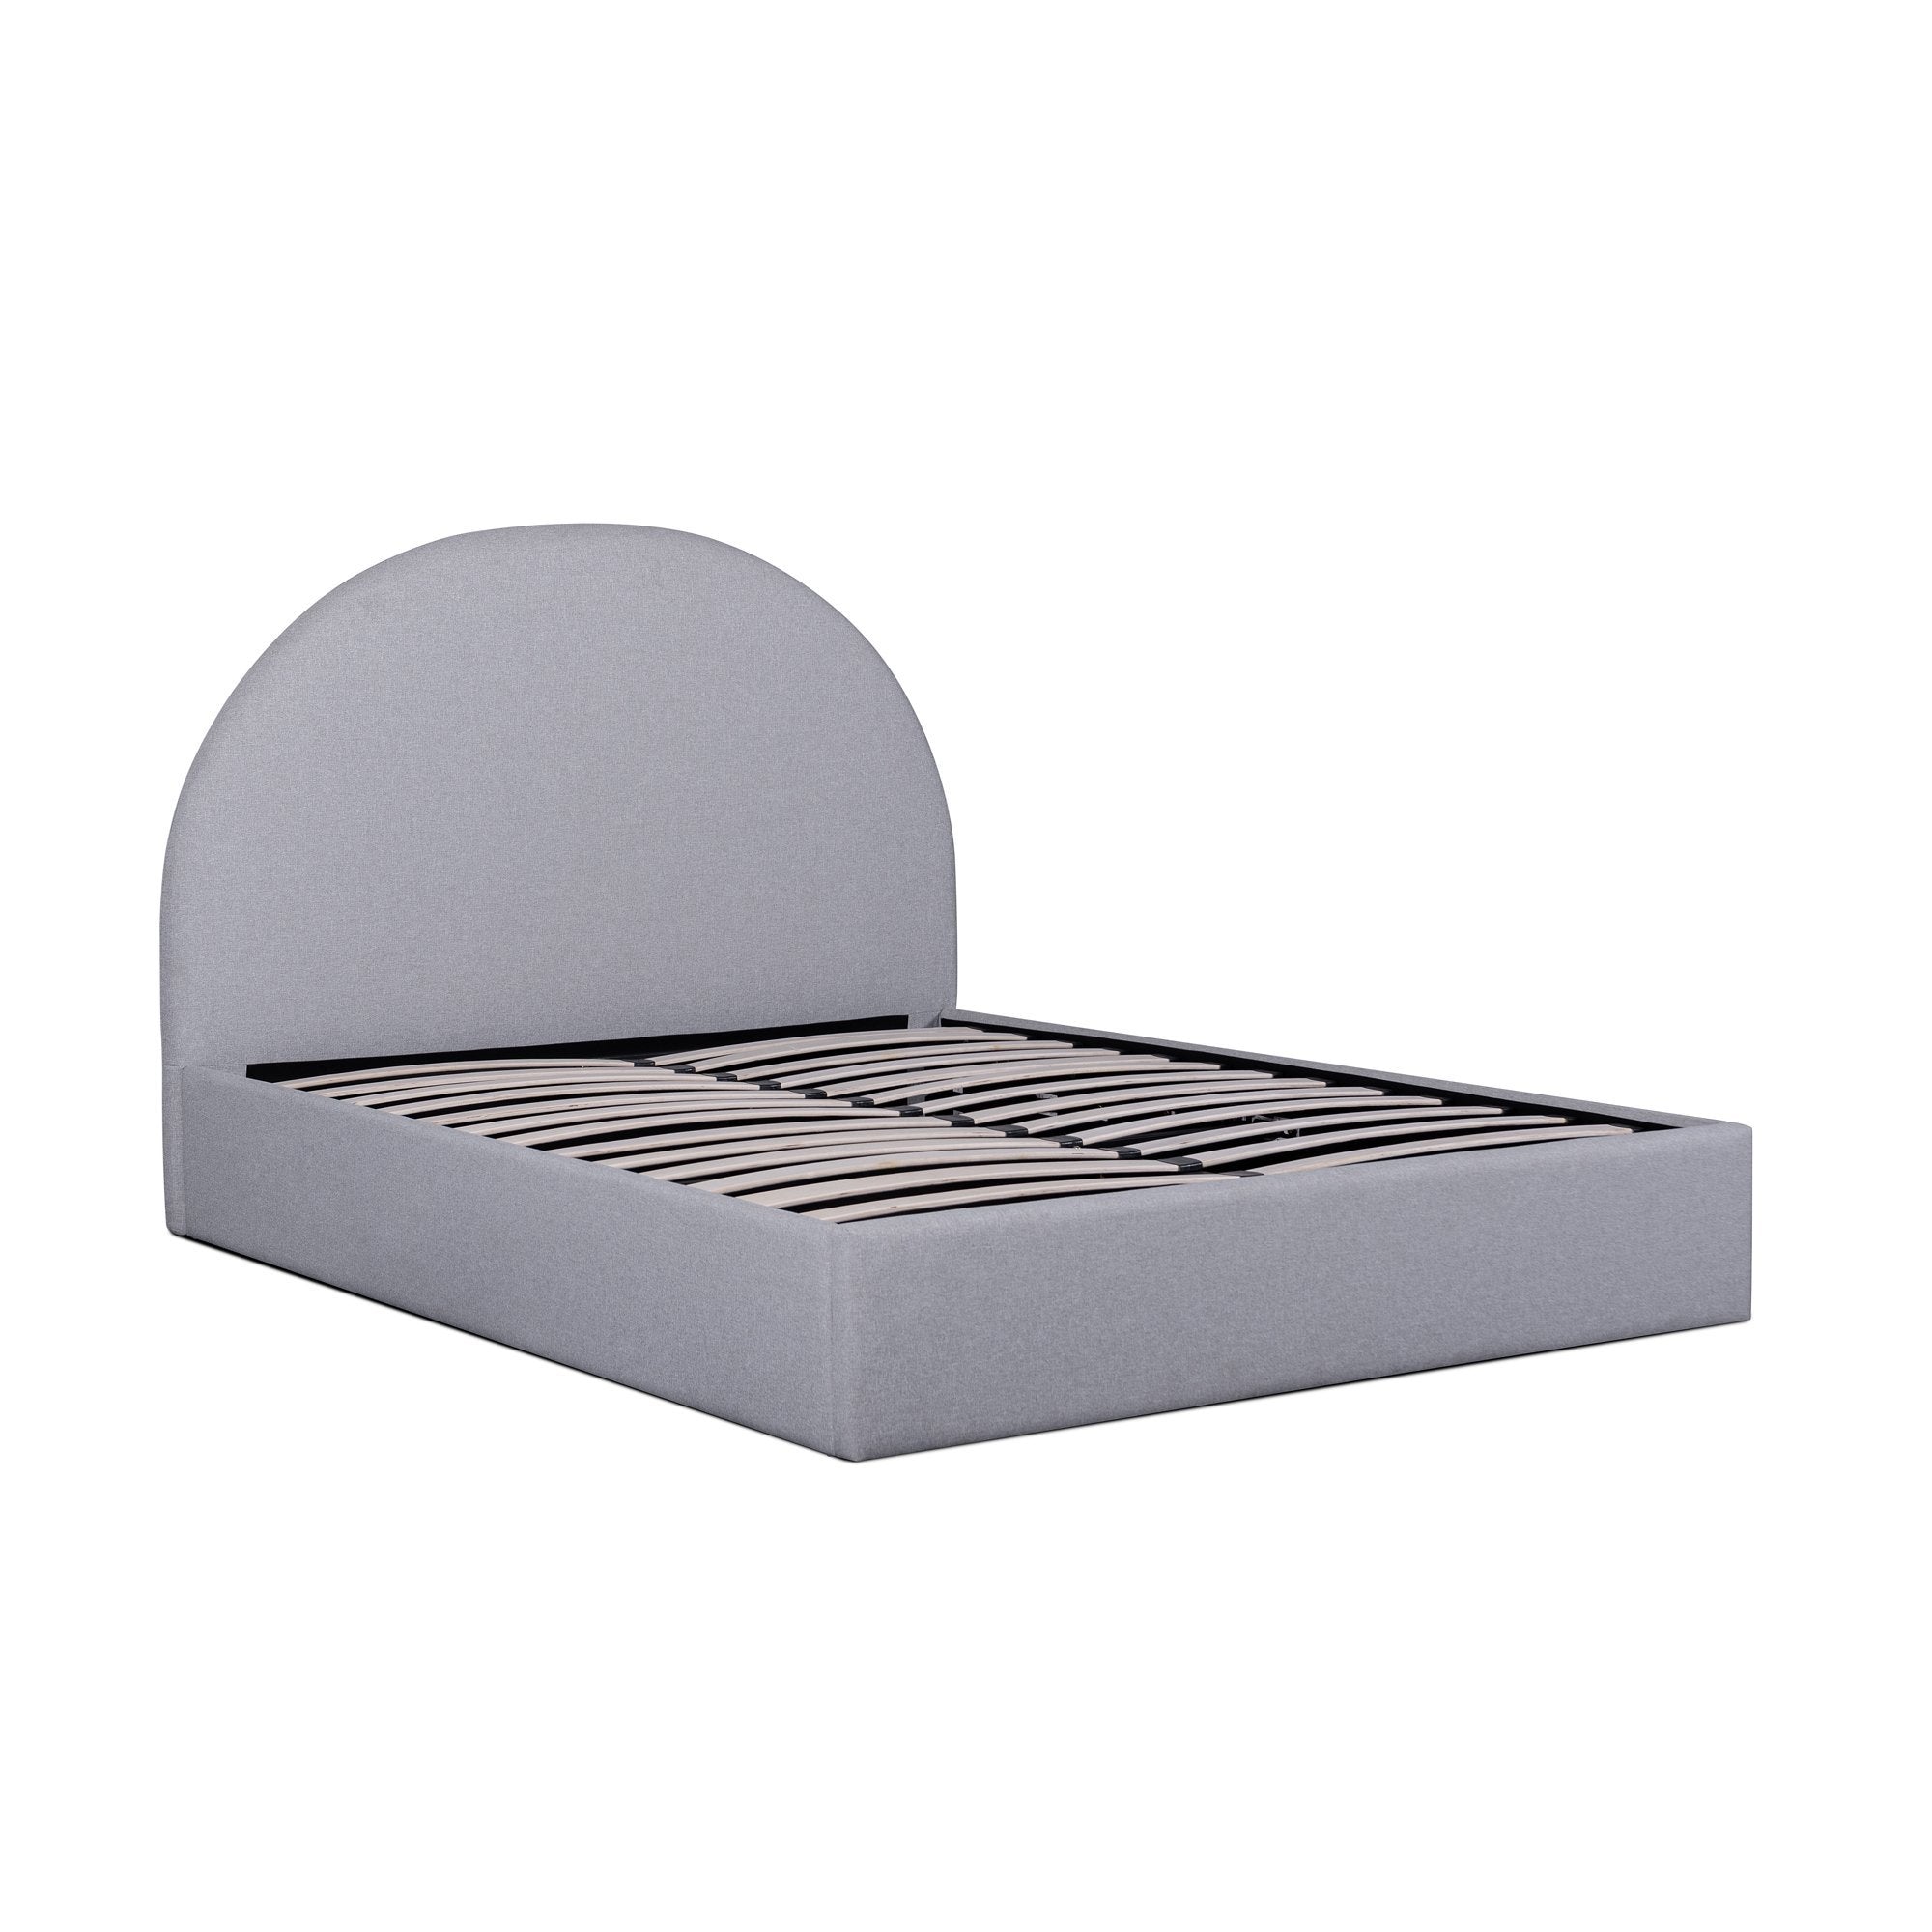 Baxter - Queen Bed Frame in Rhino Grey fabric with Storage